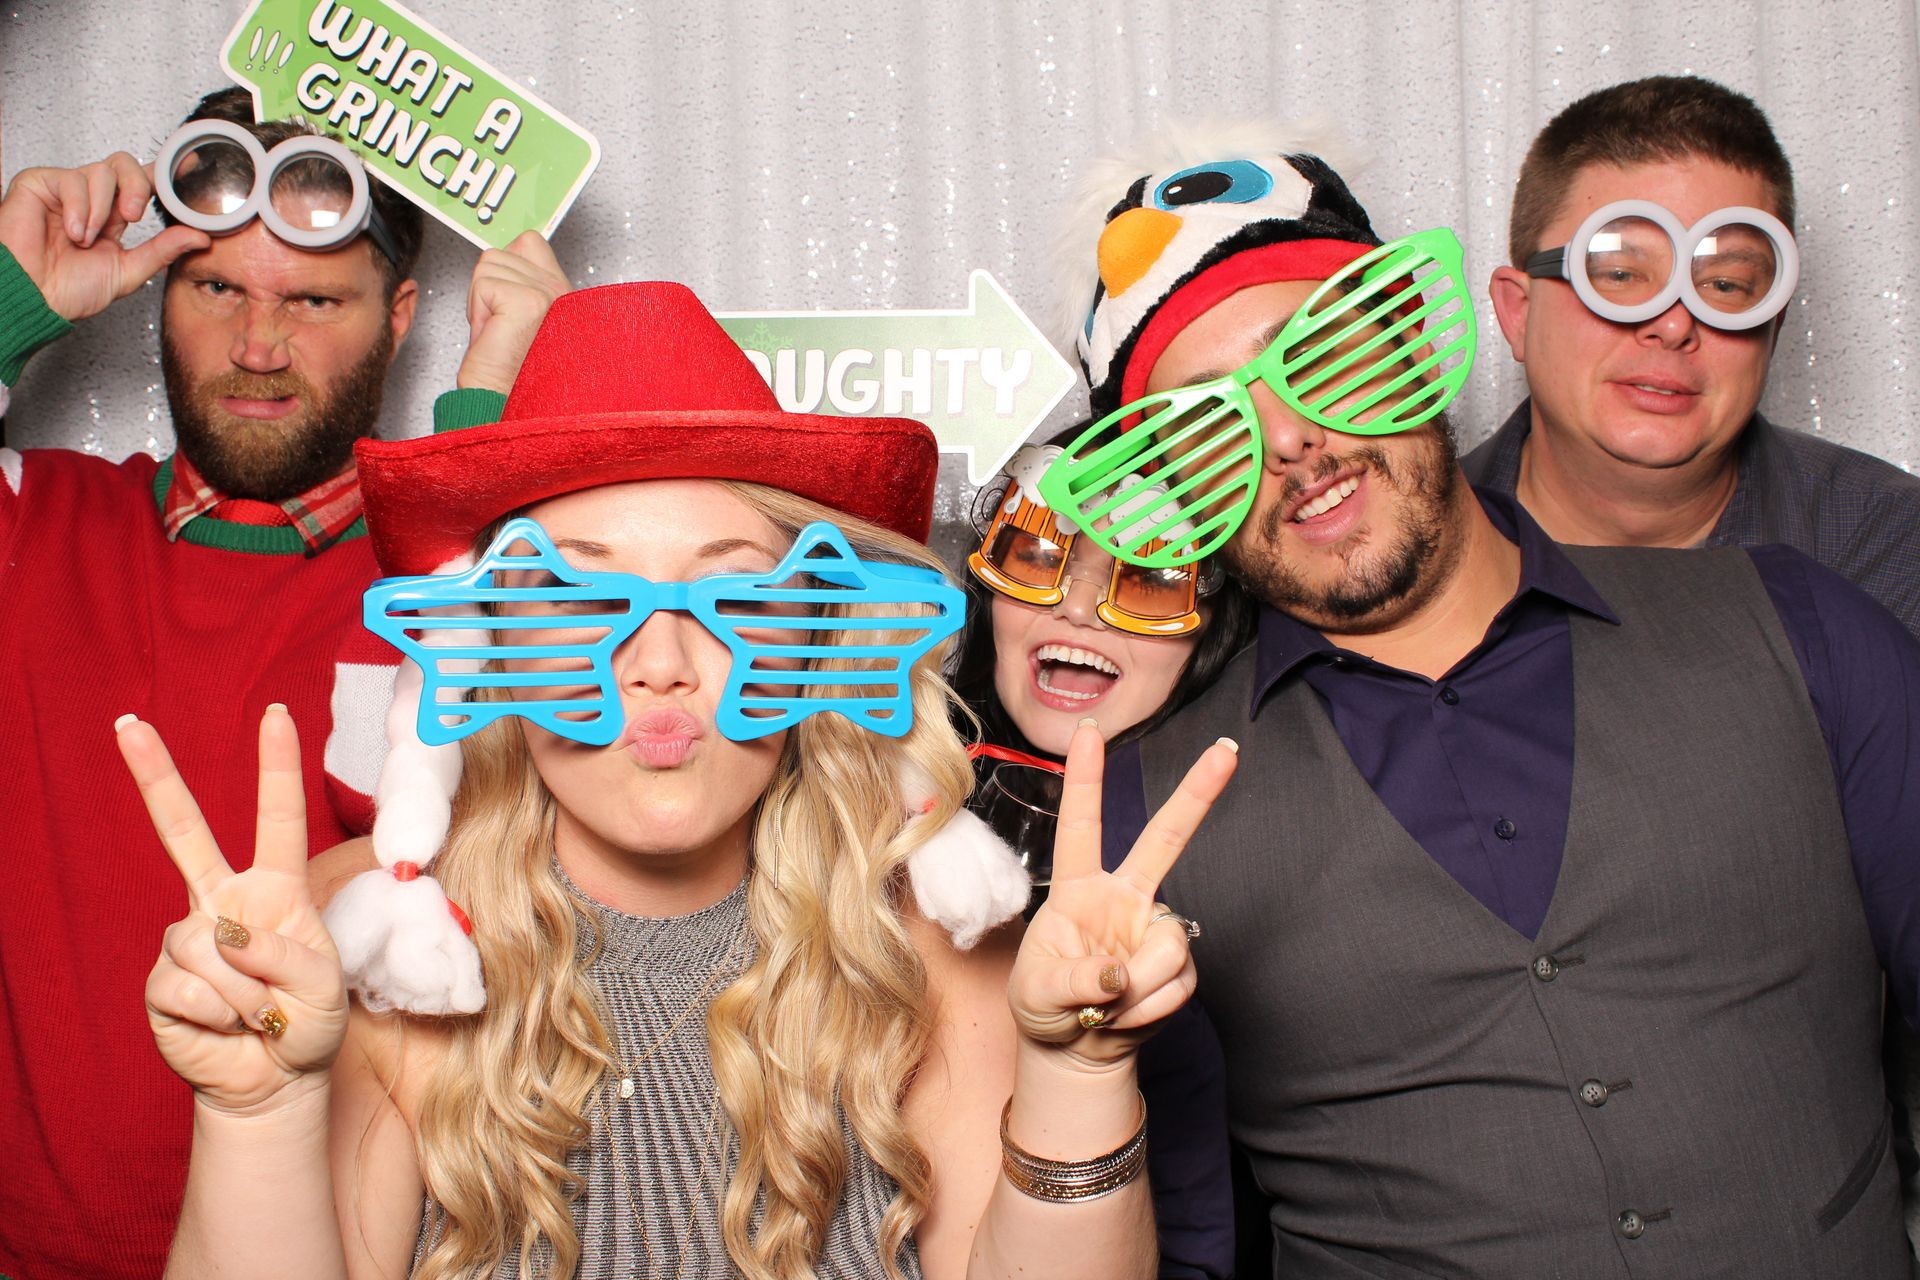  Fun-Filled Photobooth Moments